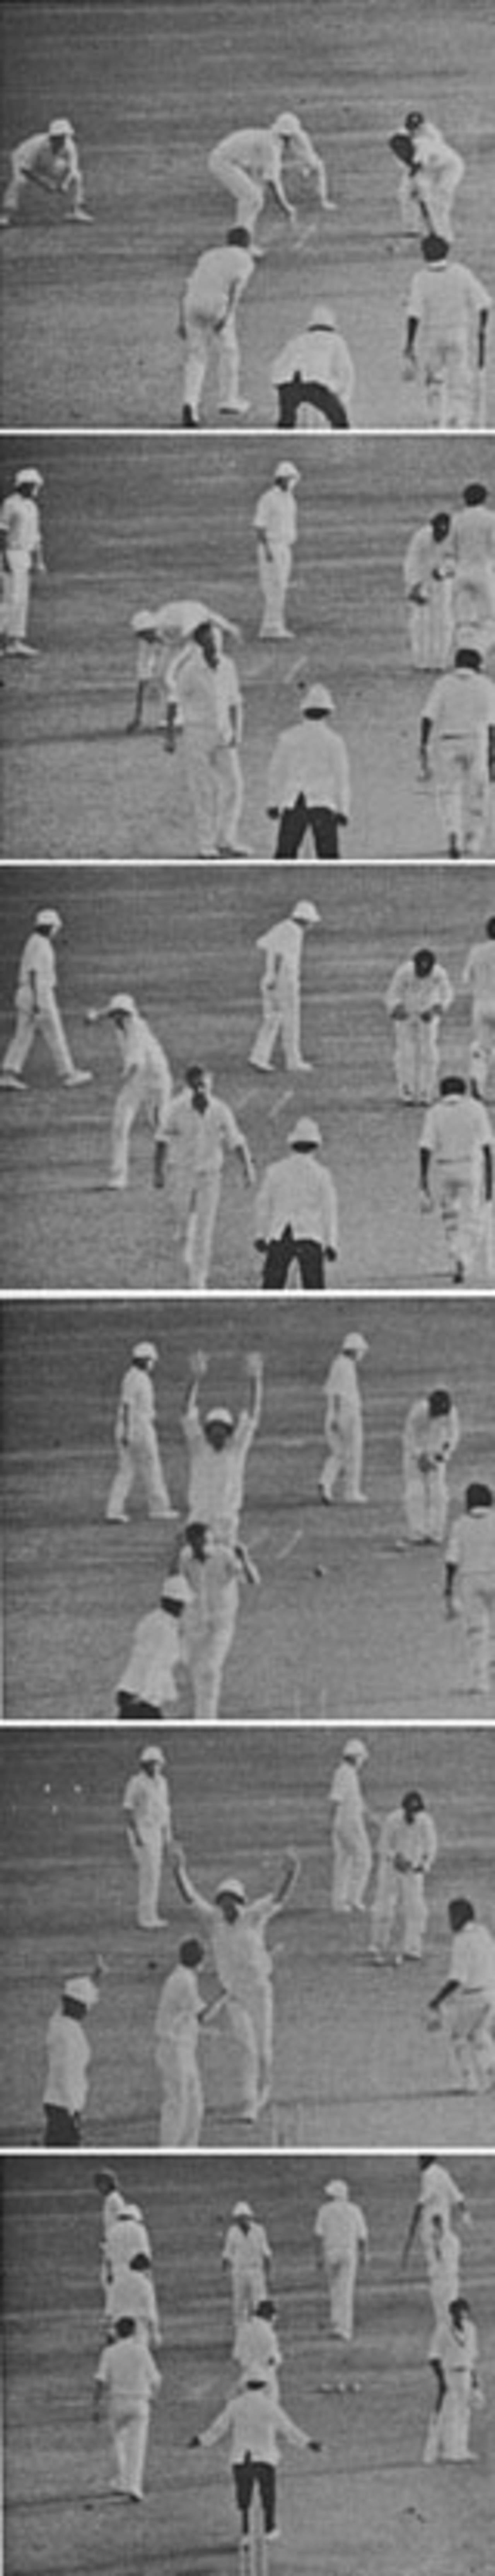 Derek Underwood bowls the last ball of the day to Bernard Julien who plays defensively to Tony Greig at silly point. As the players turn to walk off, Greig picks up the ball and throws down the stumps at the non-striker's end where Alvin Kallicharran is ambling off. He hits ths stumps, appeals, and umpire Sang Hue gives Kallicharran run-out&nbsp;&nbsp;&bull;&nbsp;&nbsp;The Cricketer International